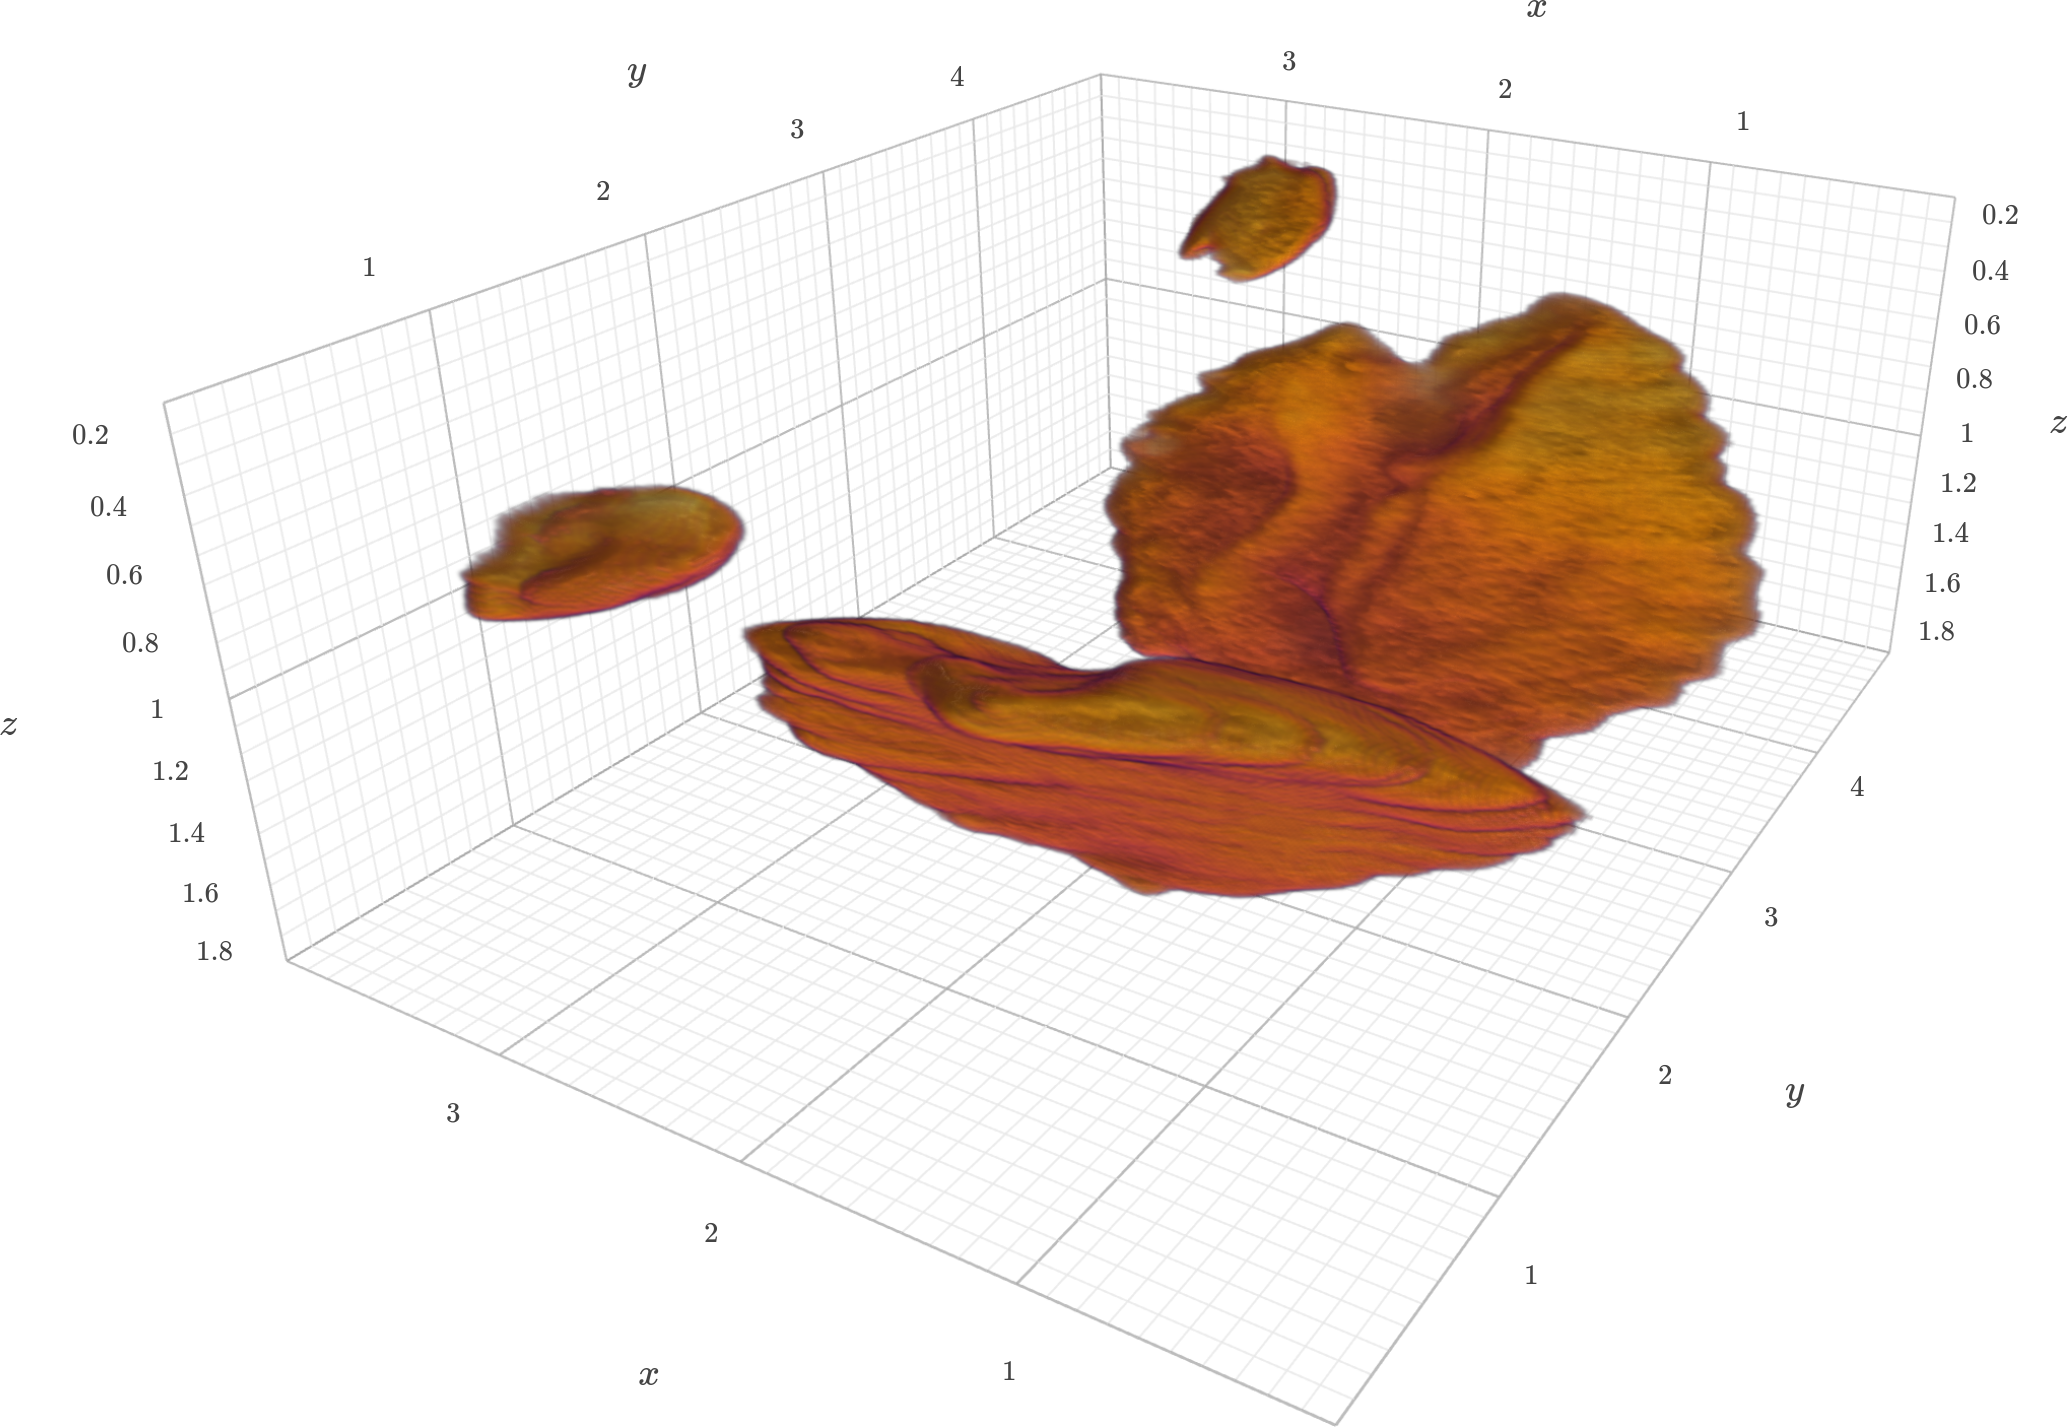 Figure 3: Static three-dimensional view of extracted otoliths of specimen 104016. The specimen was scanned with an isotropic voxel size of 13 μm. The extracted otolith has a size of approximately 250 x 350 x 150 pixels. The axes are labeled in mm steps. A dynamic view of the visualization is available in the Supplementary Materials.